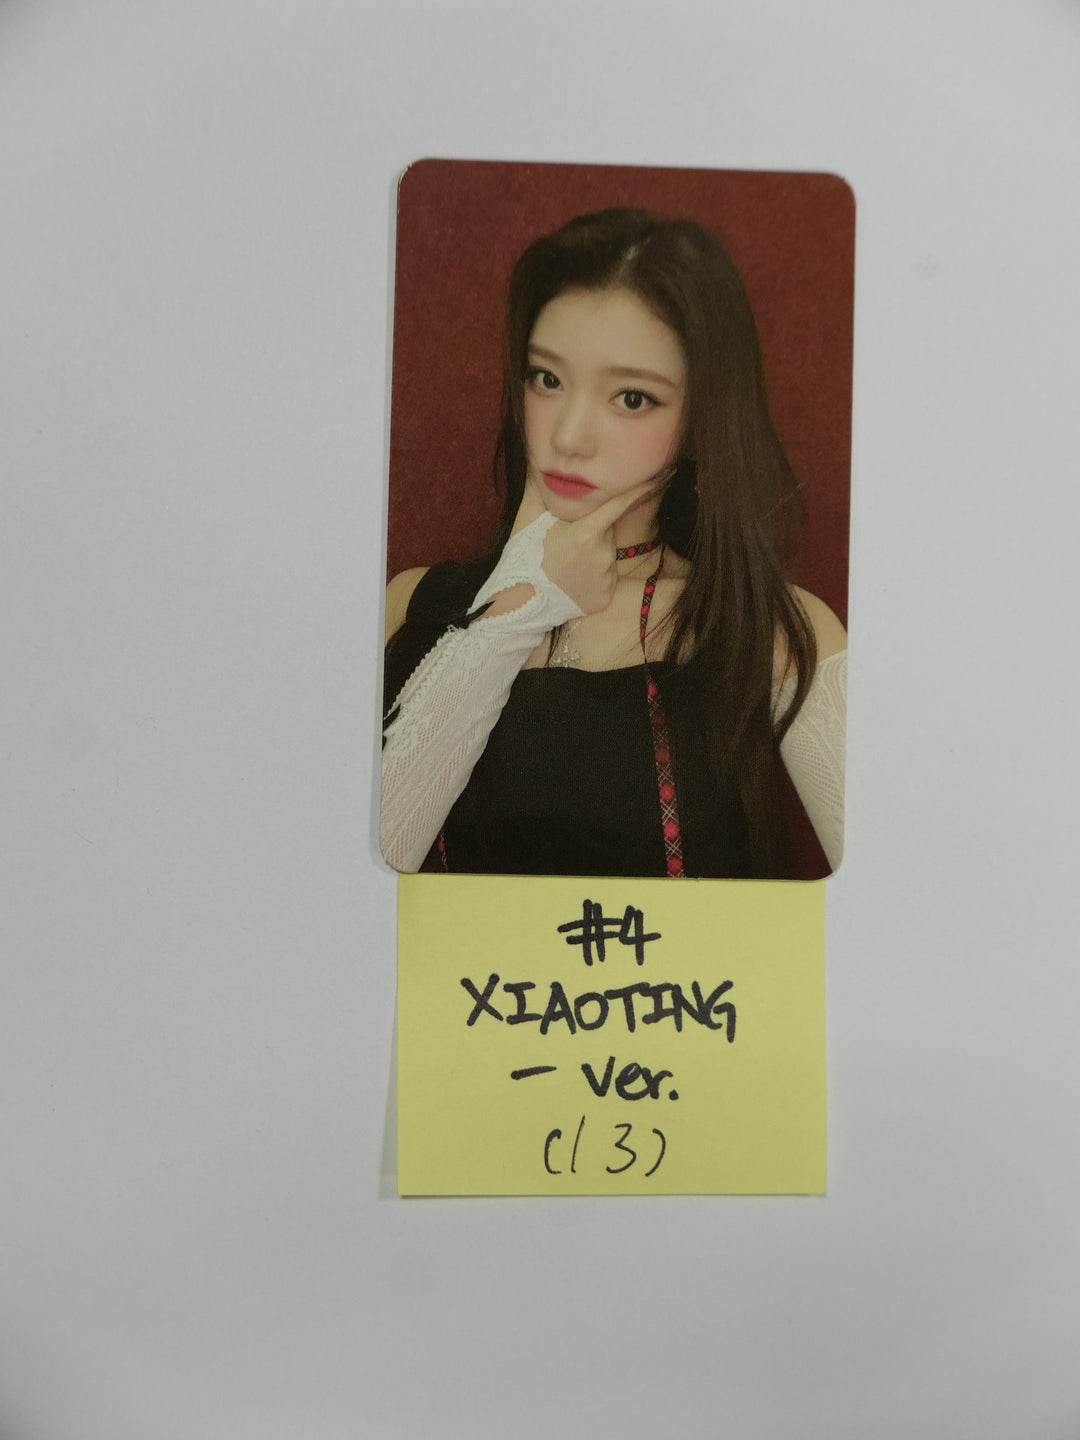 Kep1er "FIRST IMPACT" 1st - Official Photocard (Connect - Ver.) [Updated 1/20]